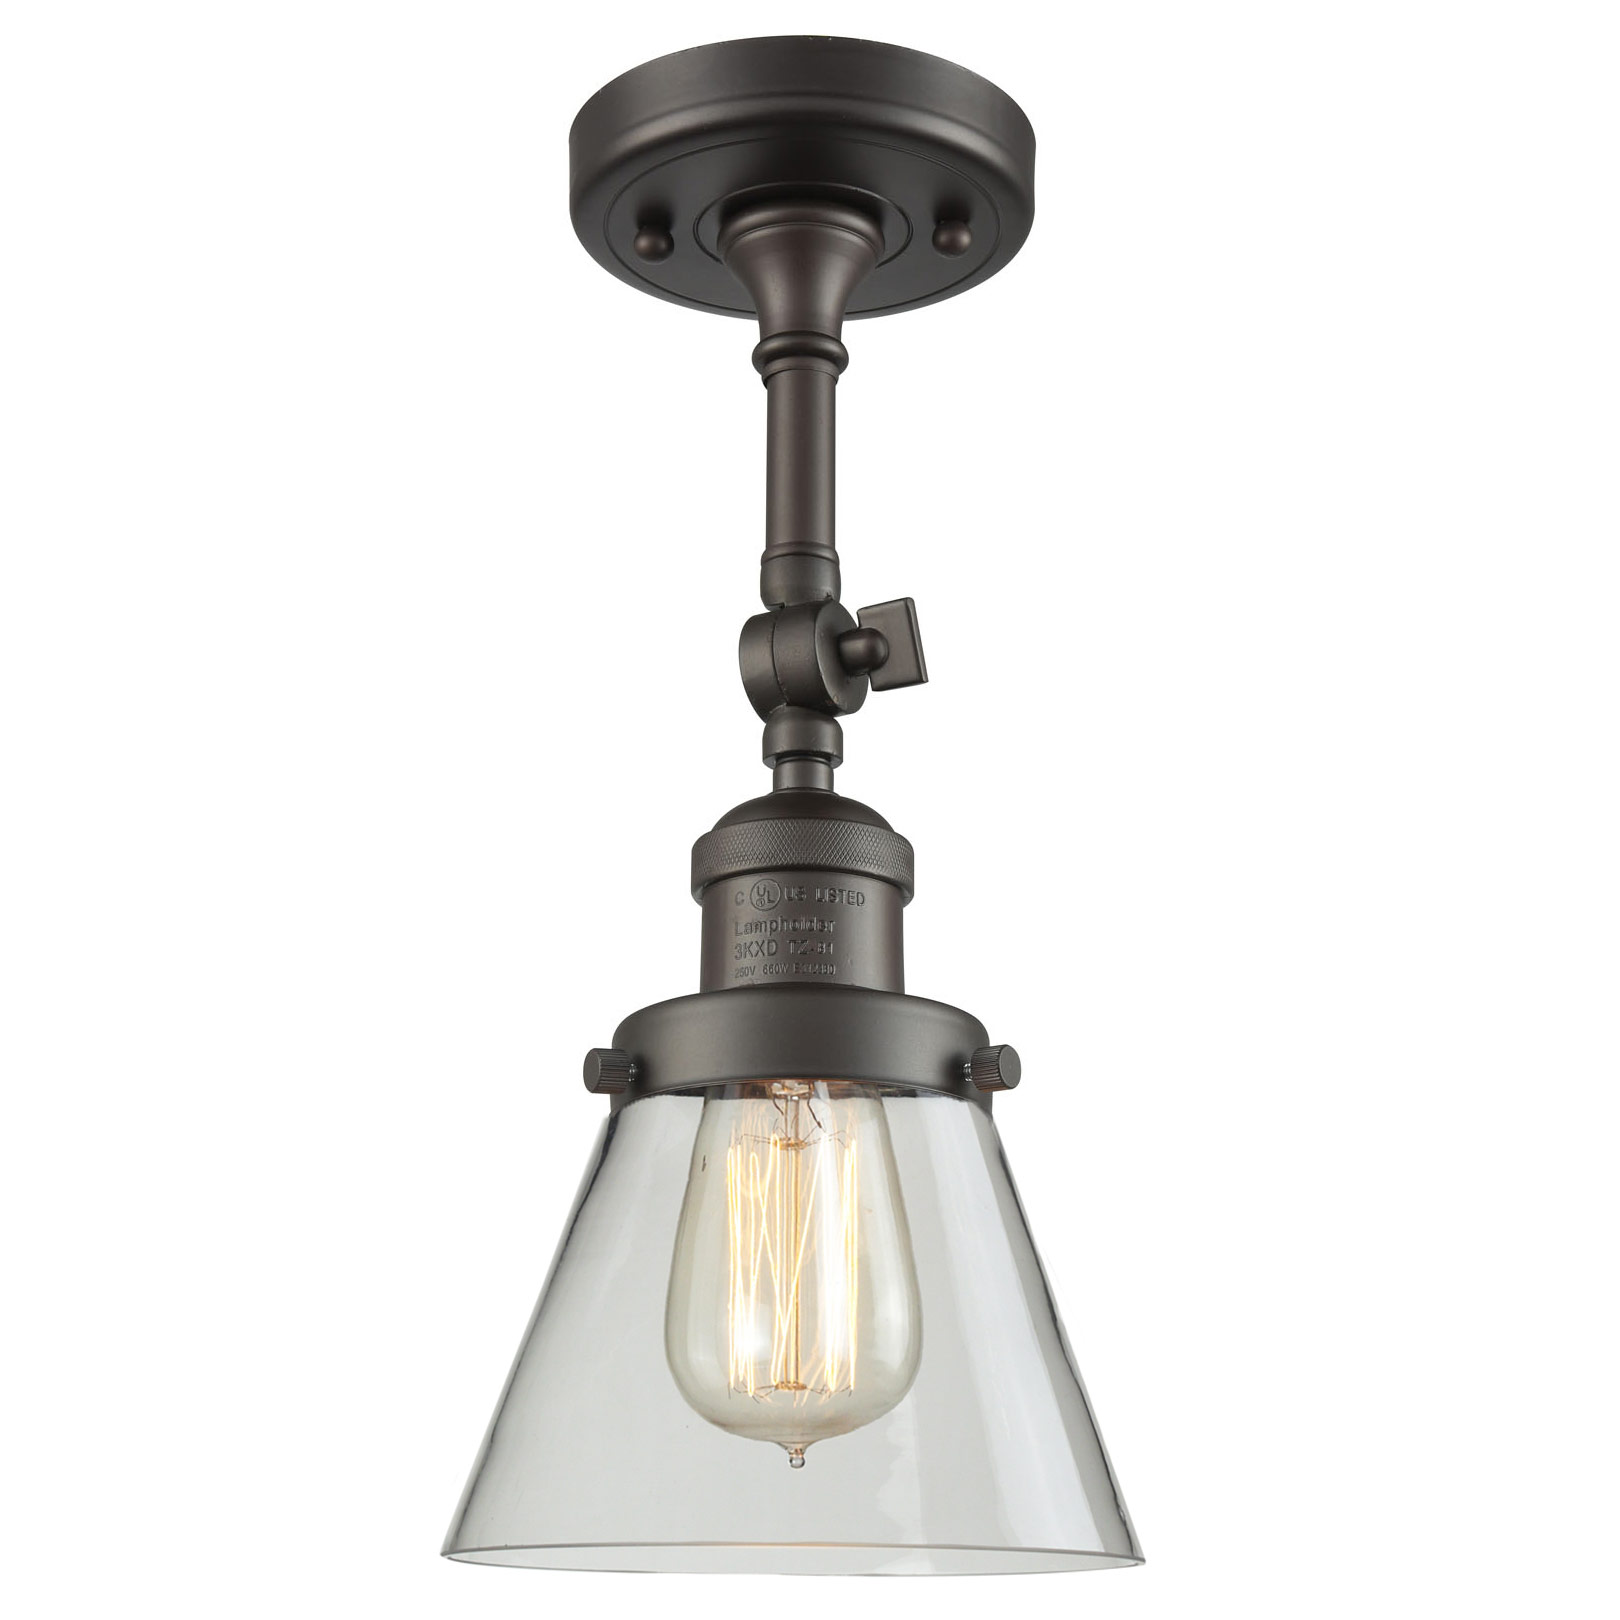 Small Cone Adjustable Semi Flush Ceiling Light By Innovations